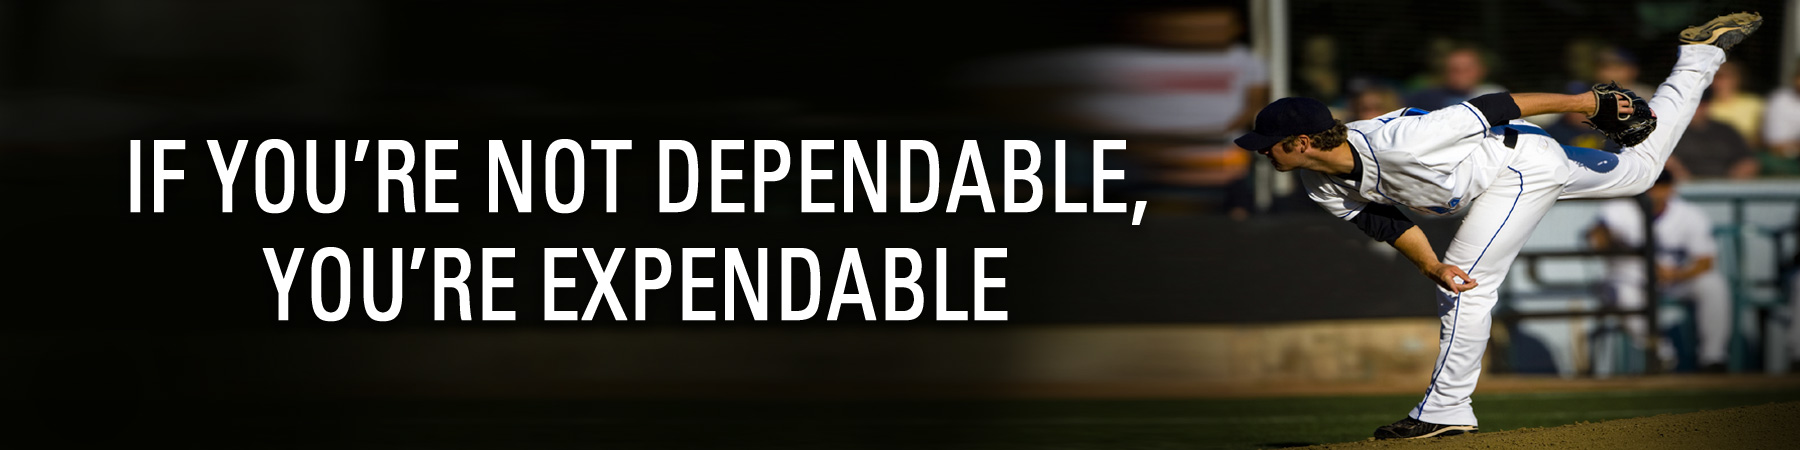 If You’re Not Dependable, You’re Expendable